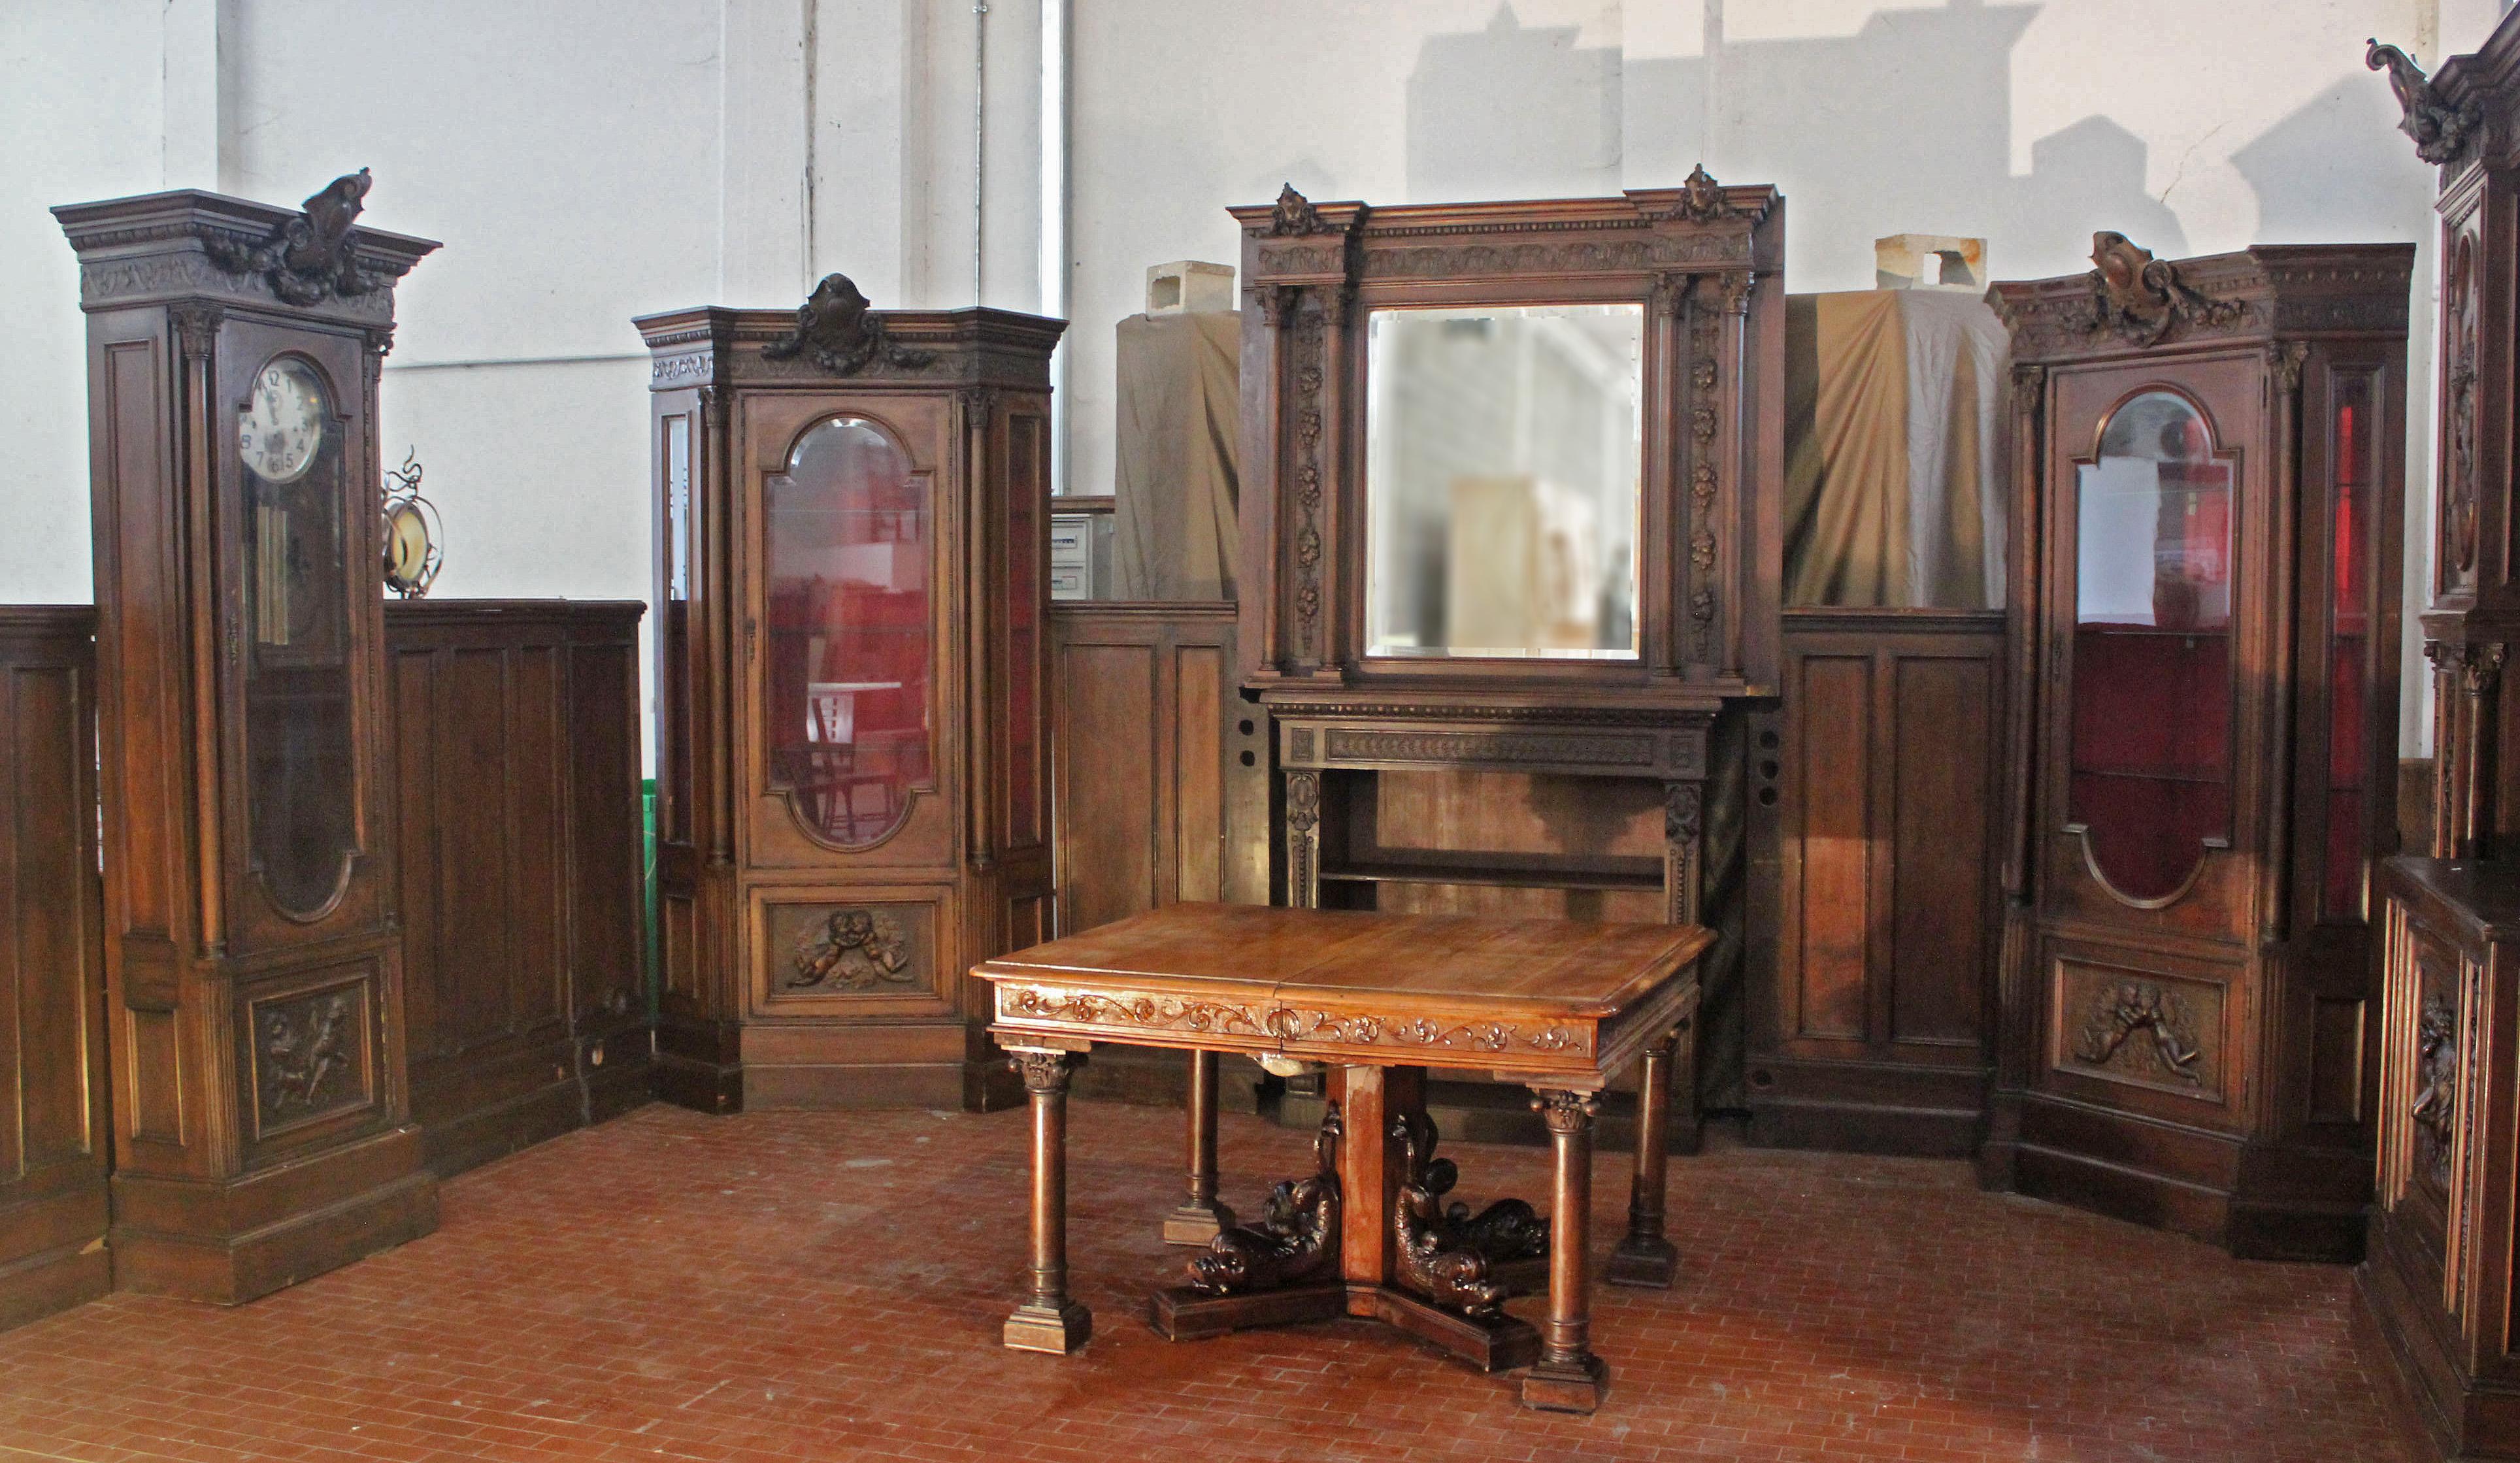 Large and important salon finely carved in walnut wood, from Genoa, which includes: Boiserie H163x700 (to be restored), 2 sideboards with riser H 293 X 247 X 70 (good condition), 2 cornerboards H 263 X 136 X 90 (good condition) 1 Clock H 263 X 80 X